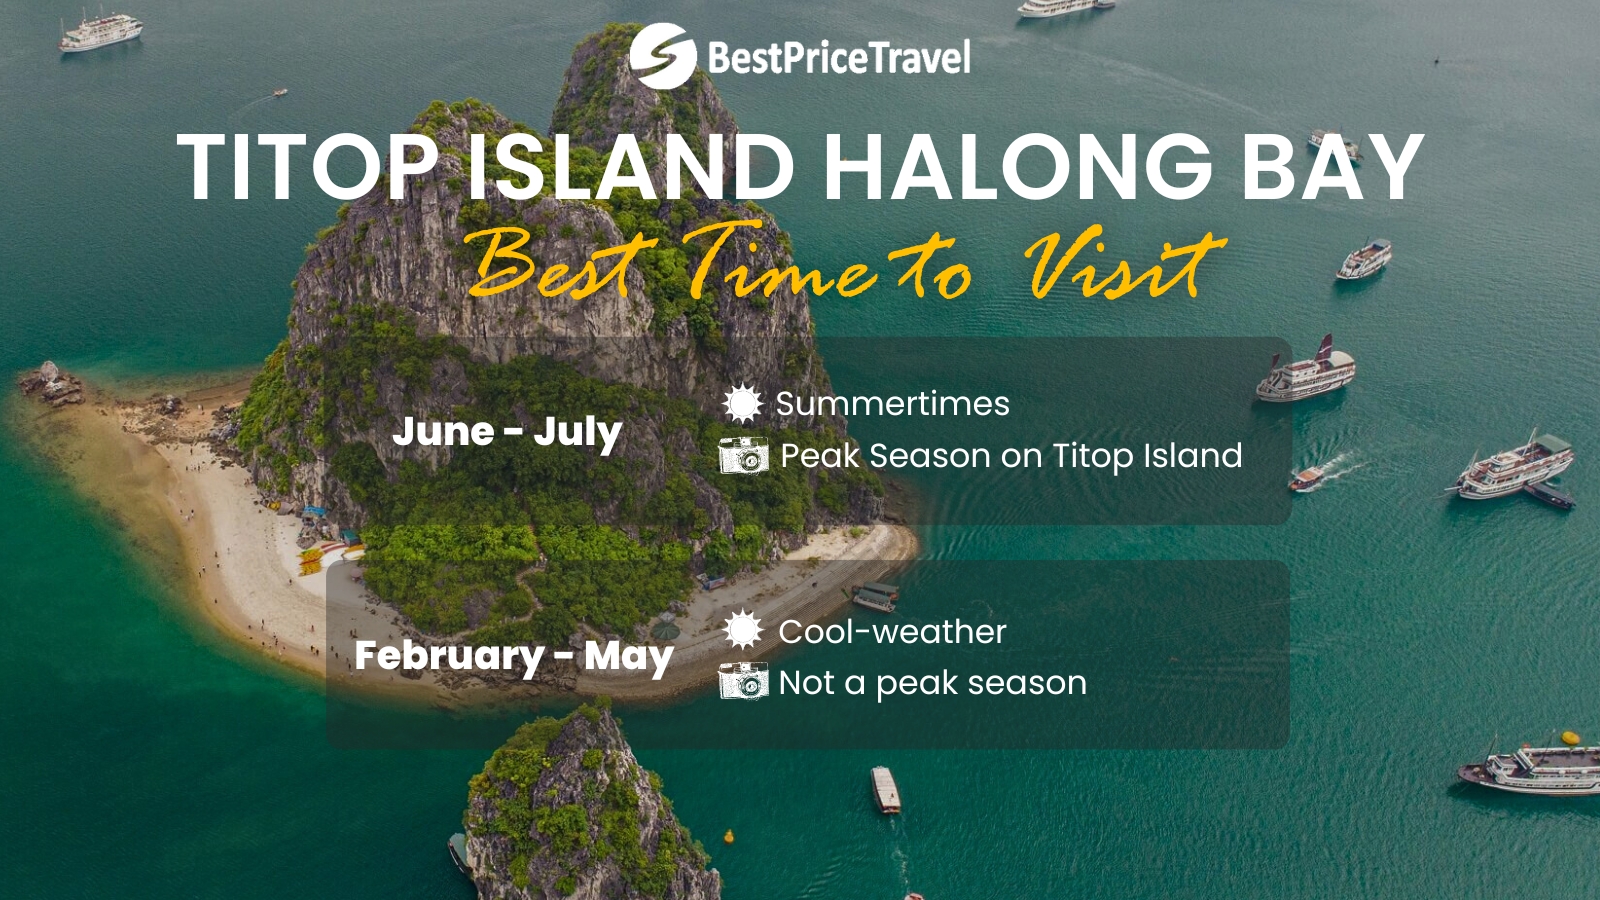 Best time to visit Titop Island